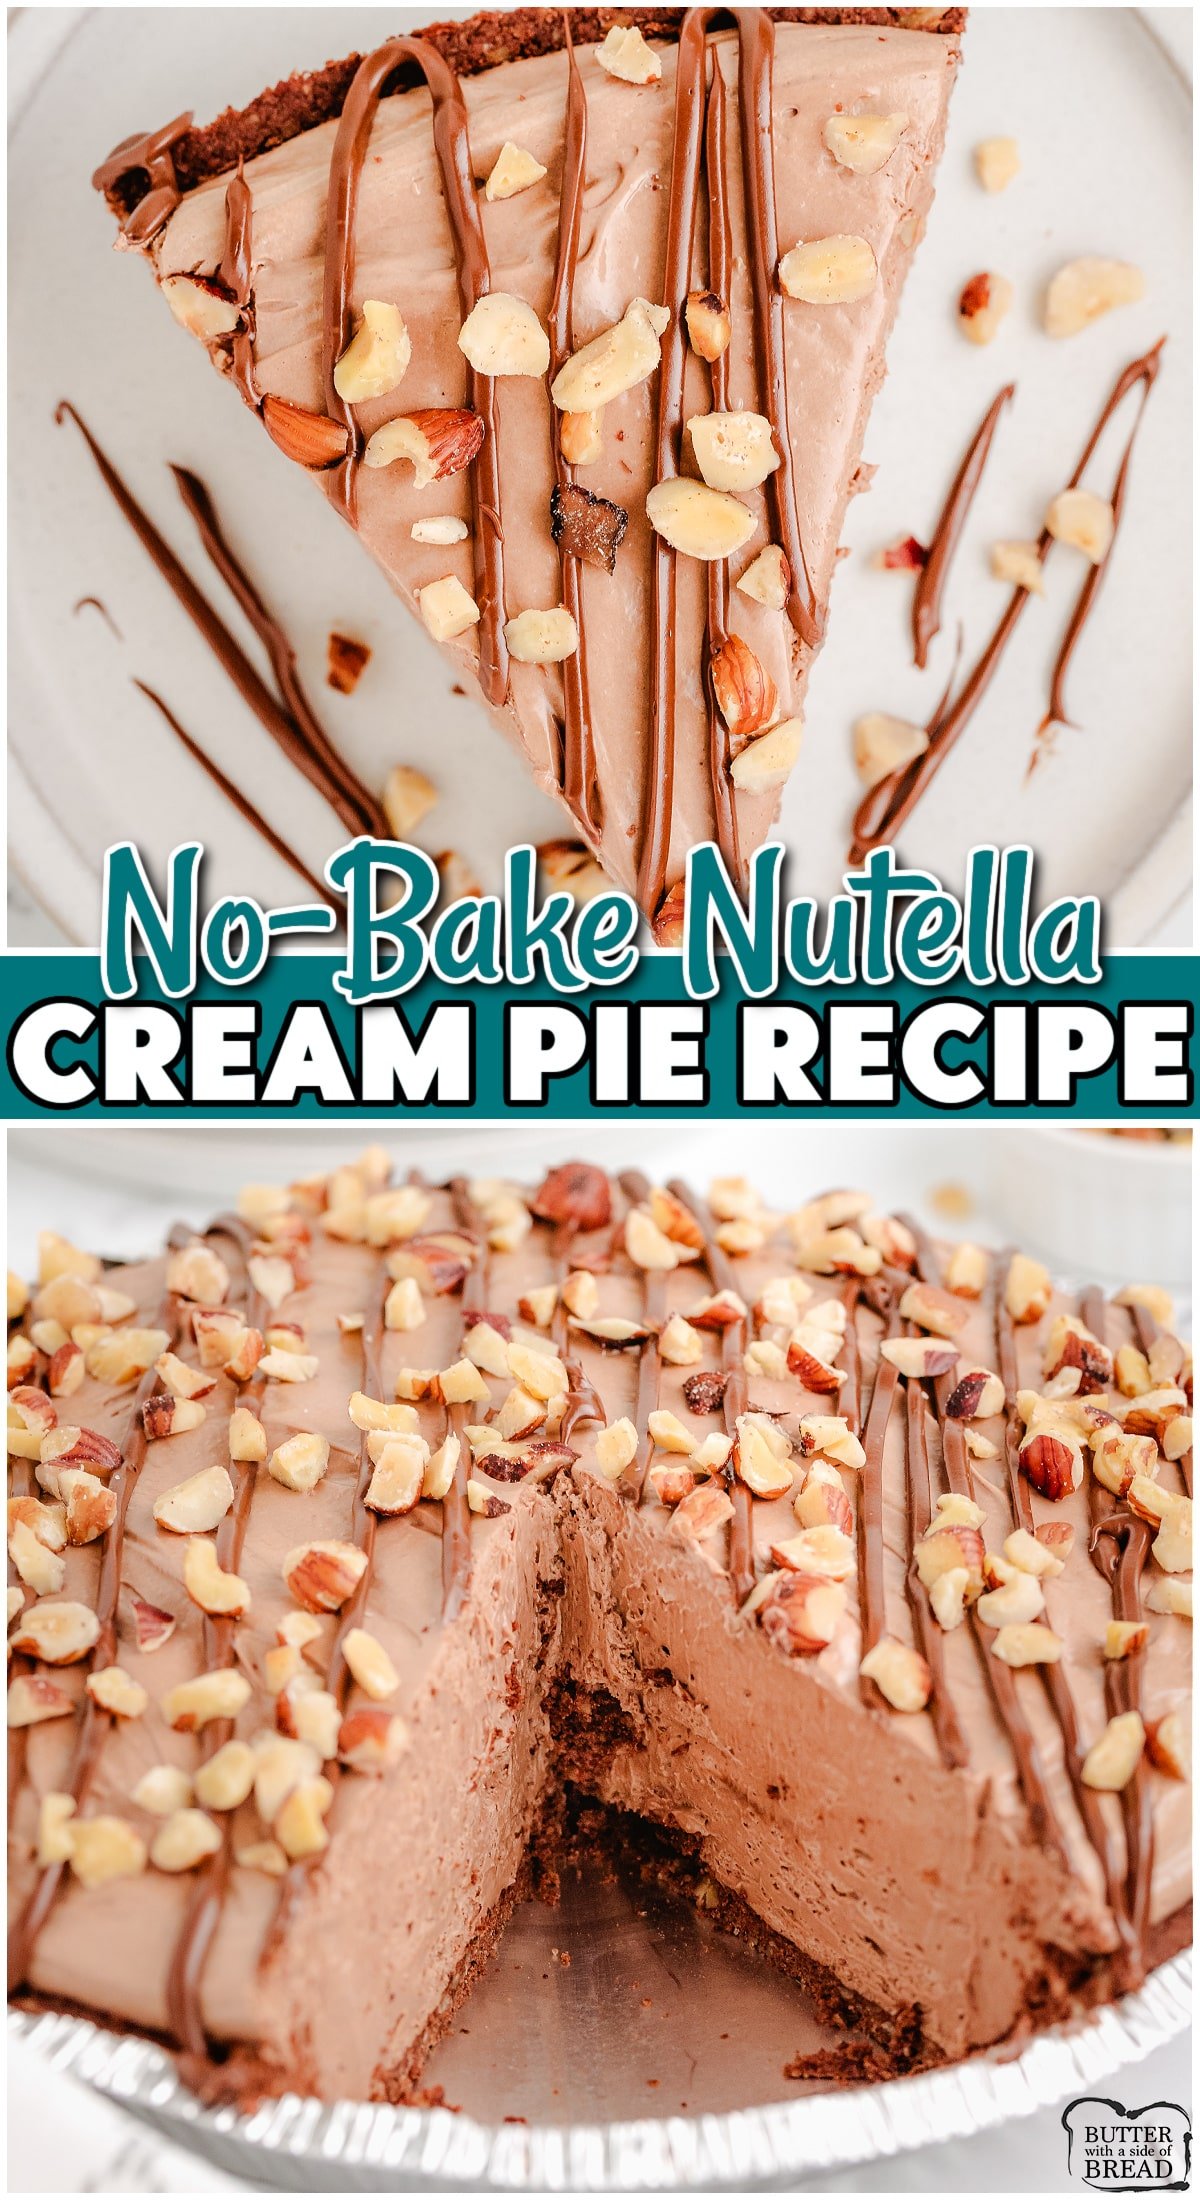 Simple No Bake Nutella Cream Pie that's made in minutes and perfect for hazelnut lovers! Nutella, cream cheese, sugar & whipped topping combine for a fantastic no bake chocolate pie that everyone enjoys.